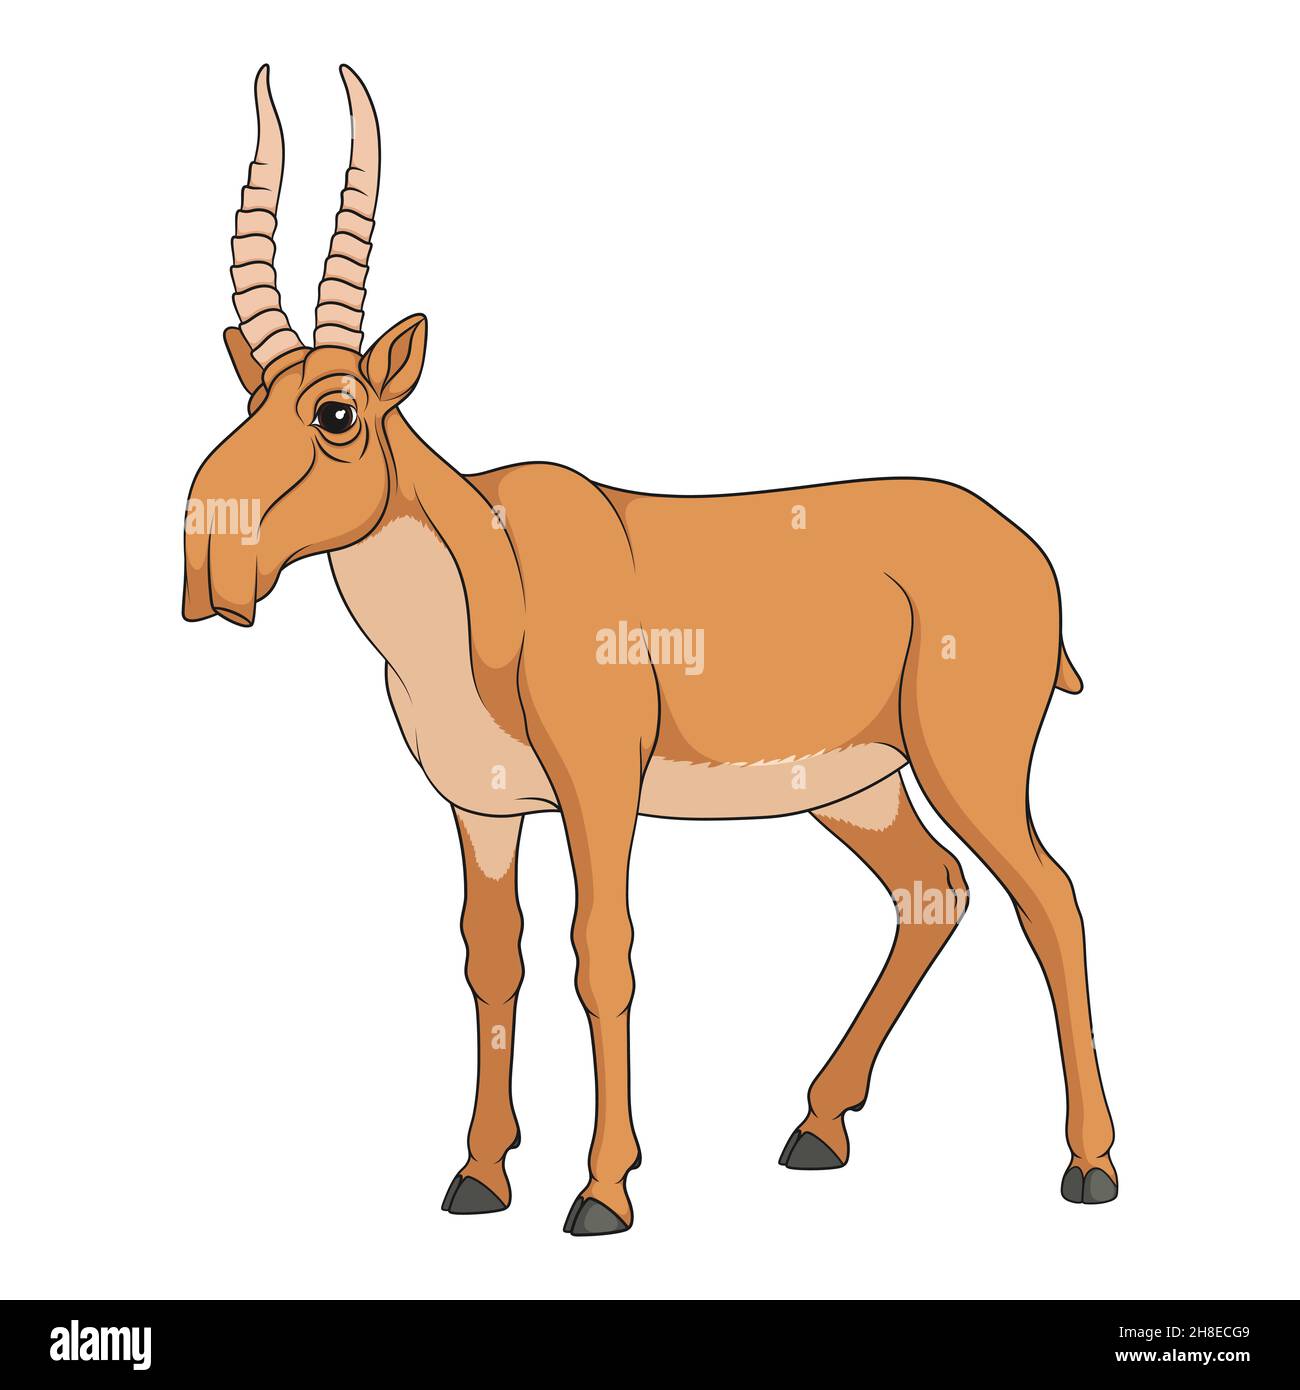 Color illustration with the image of the saiga antelope. Isolated vector objects on a white background. Stock Vector